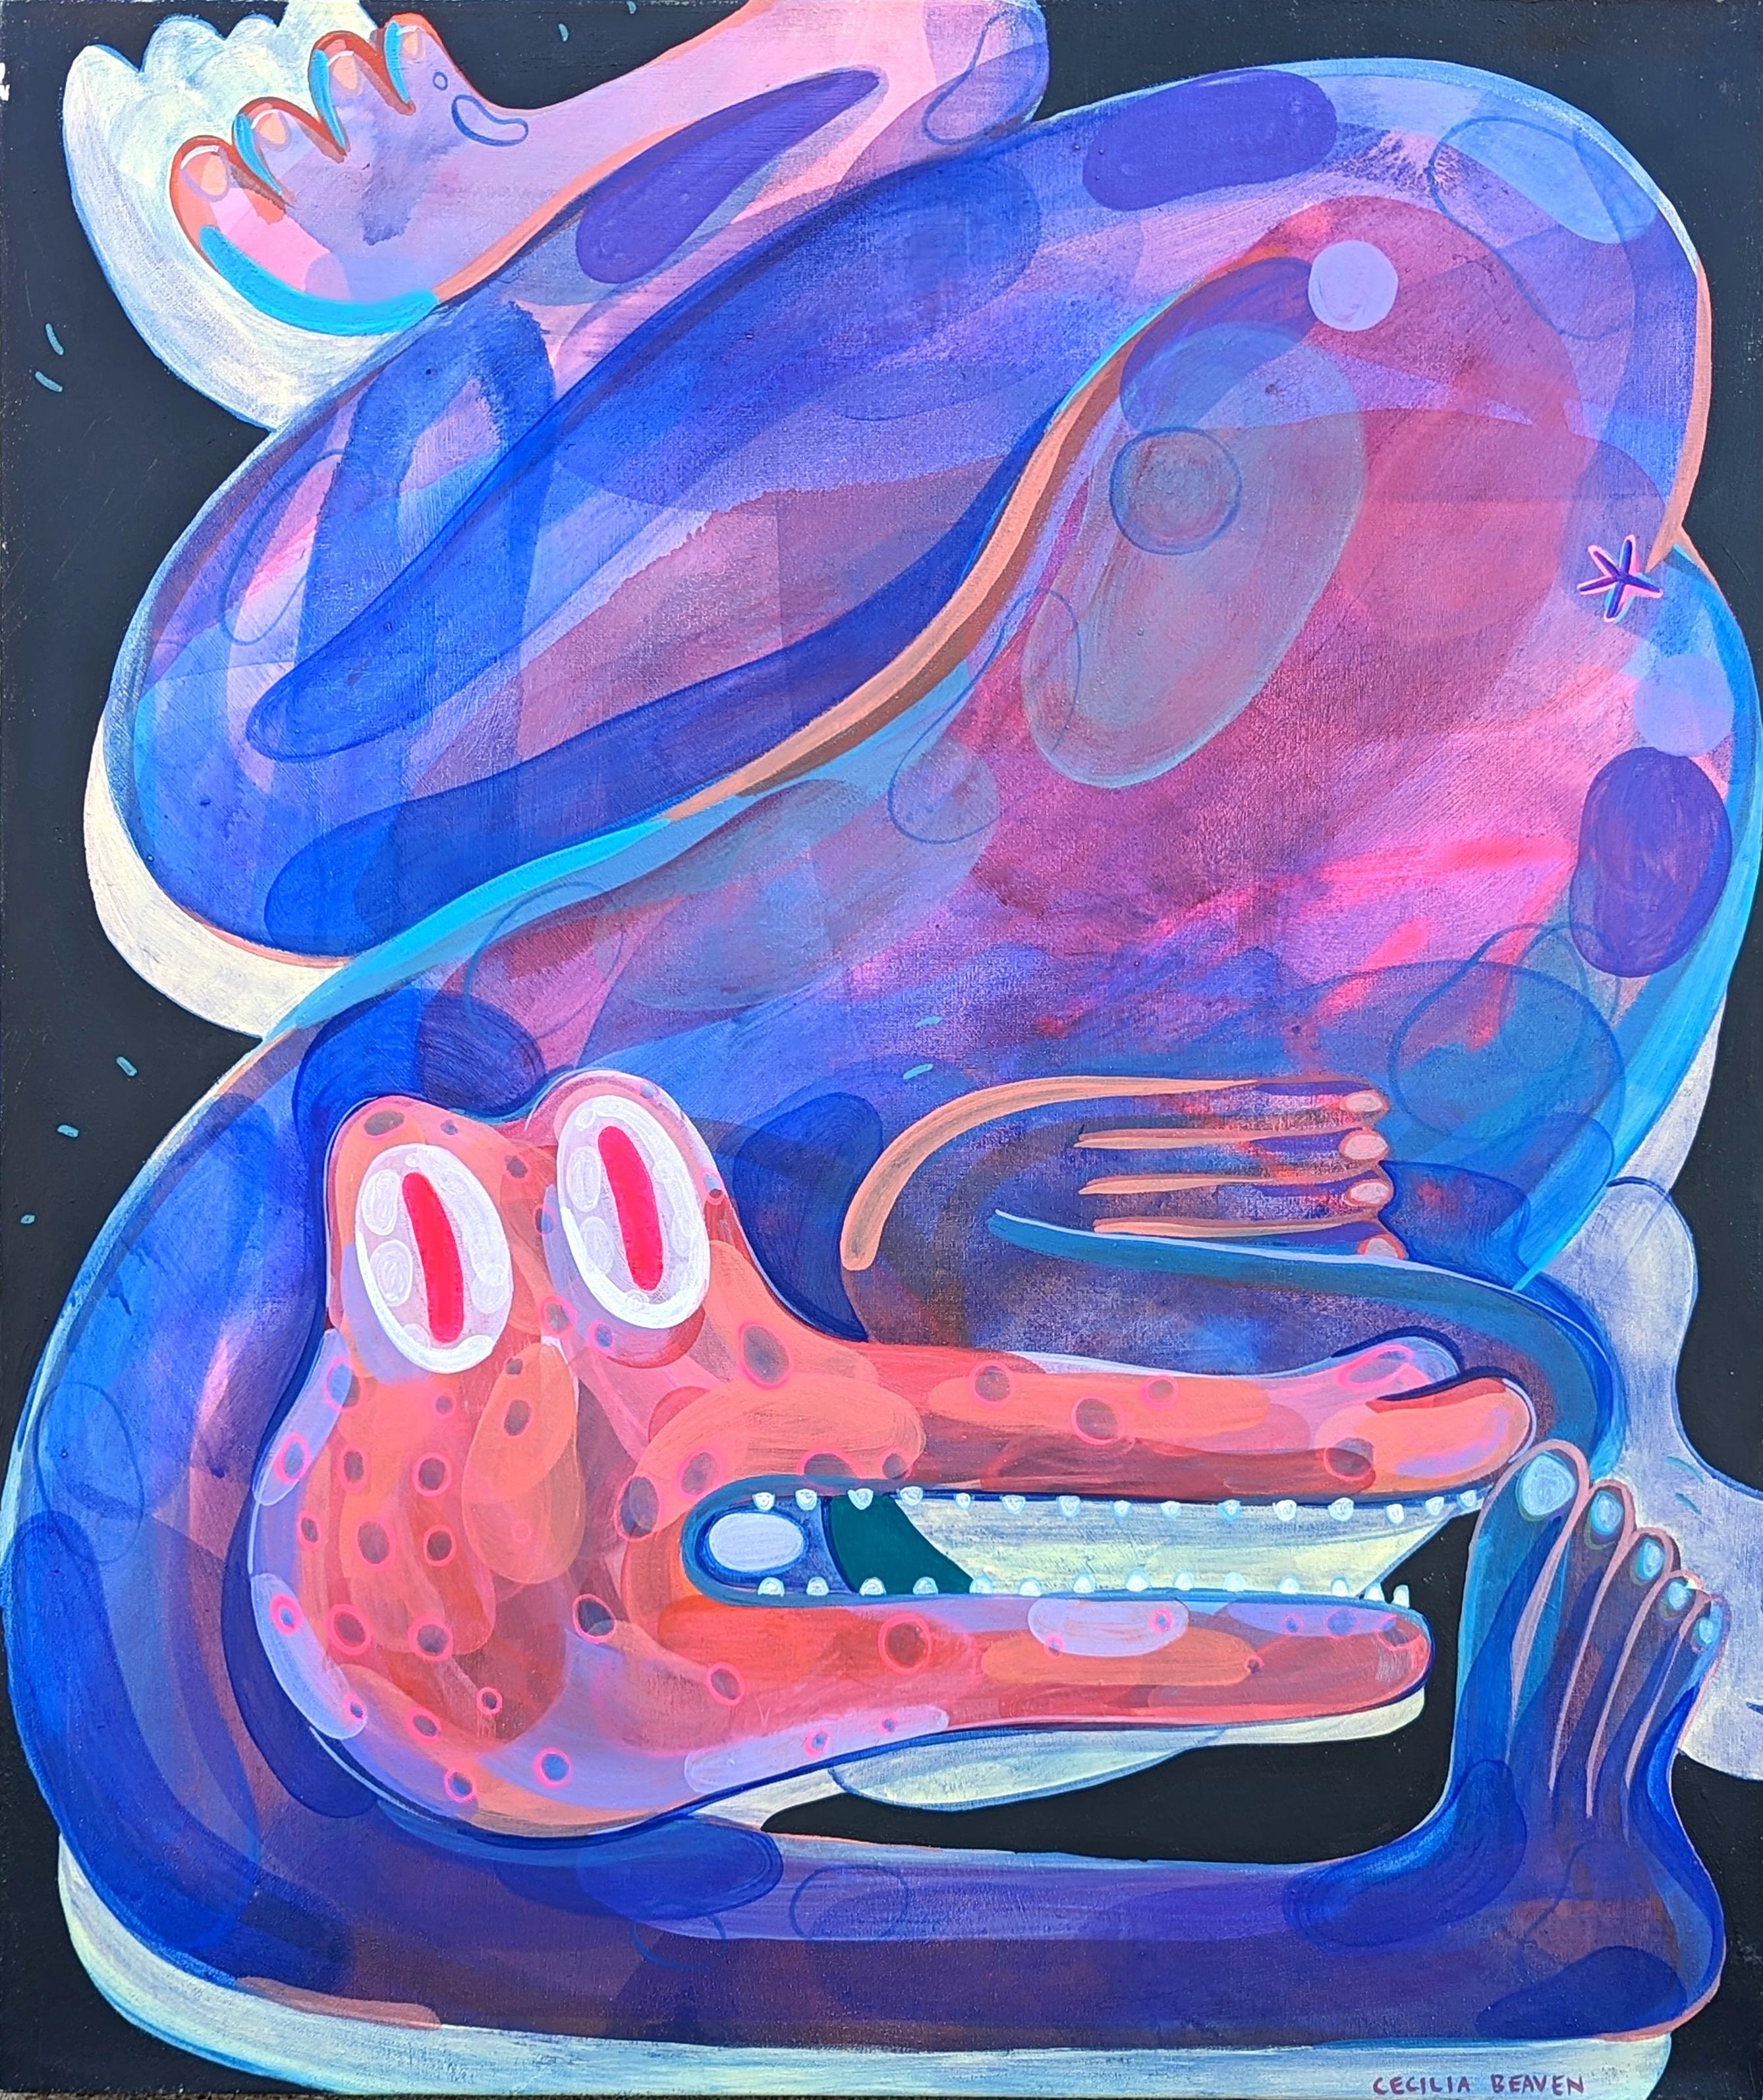 Cecilia Beaven Figurative Painting - Contemporary Abstract Pink & Blue Biomorphic Contorted Alligator Figure Painting